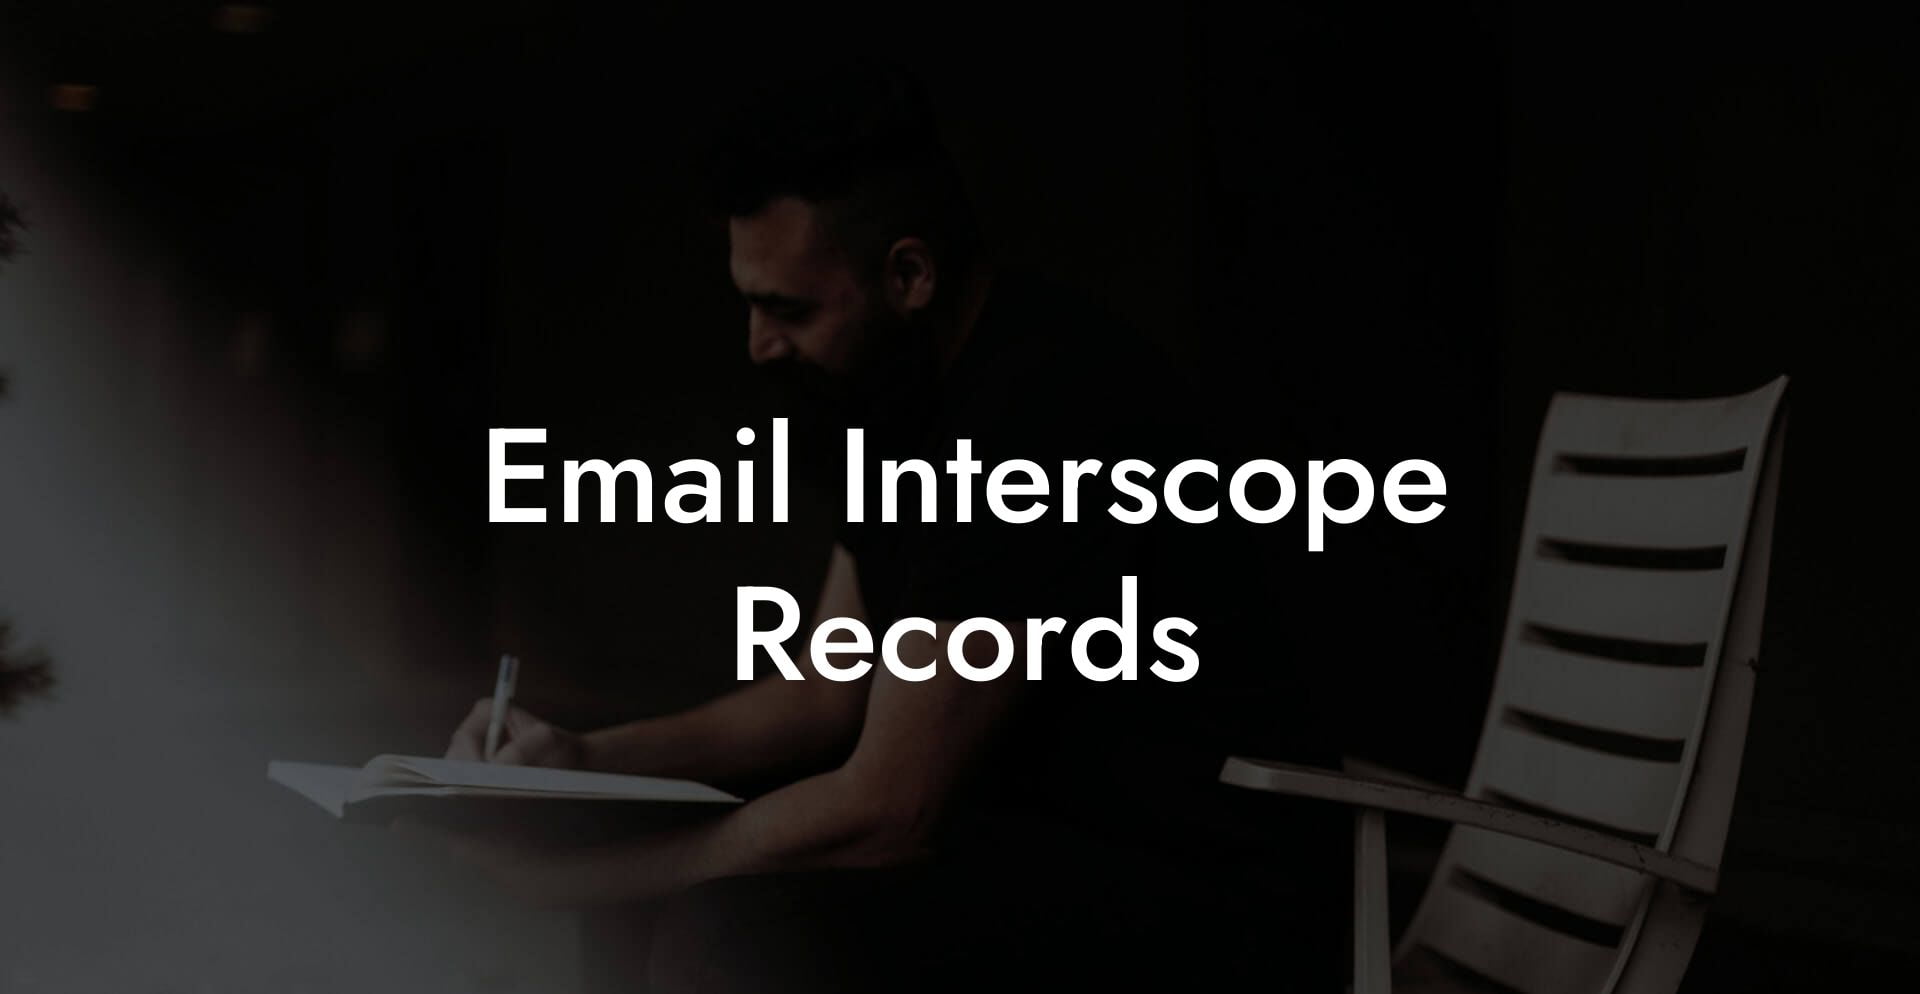 Email Interscope Records